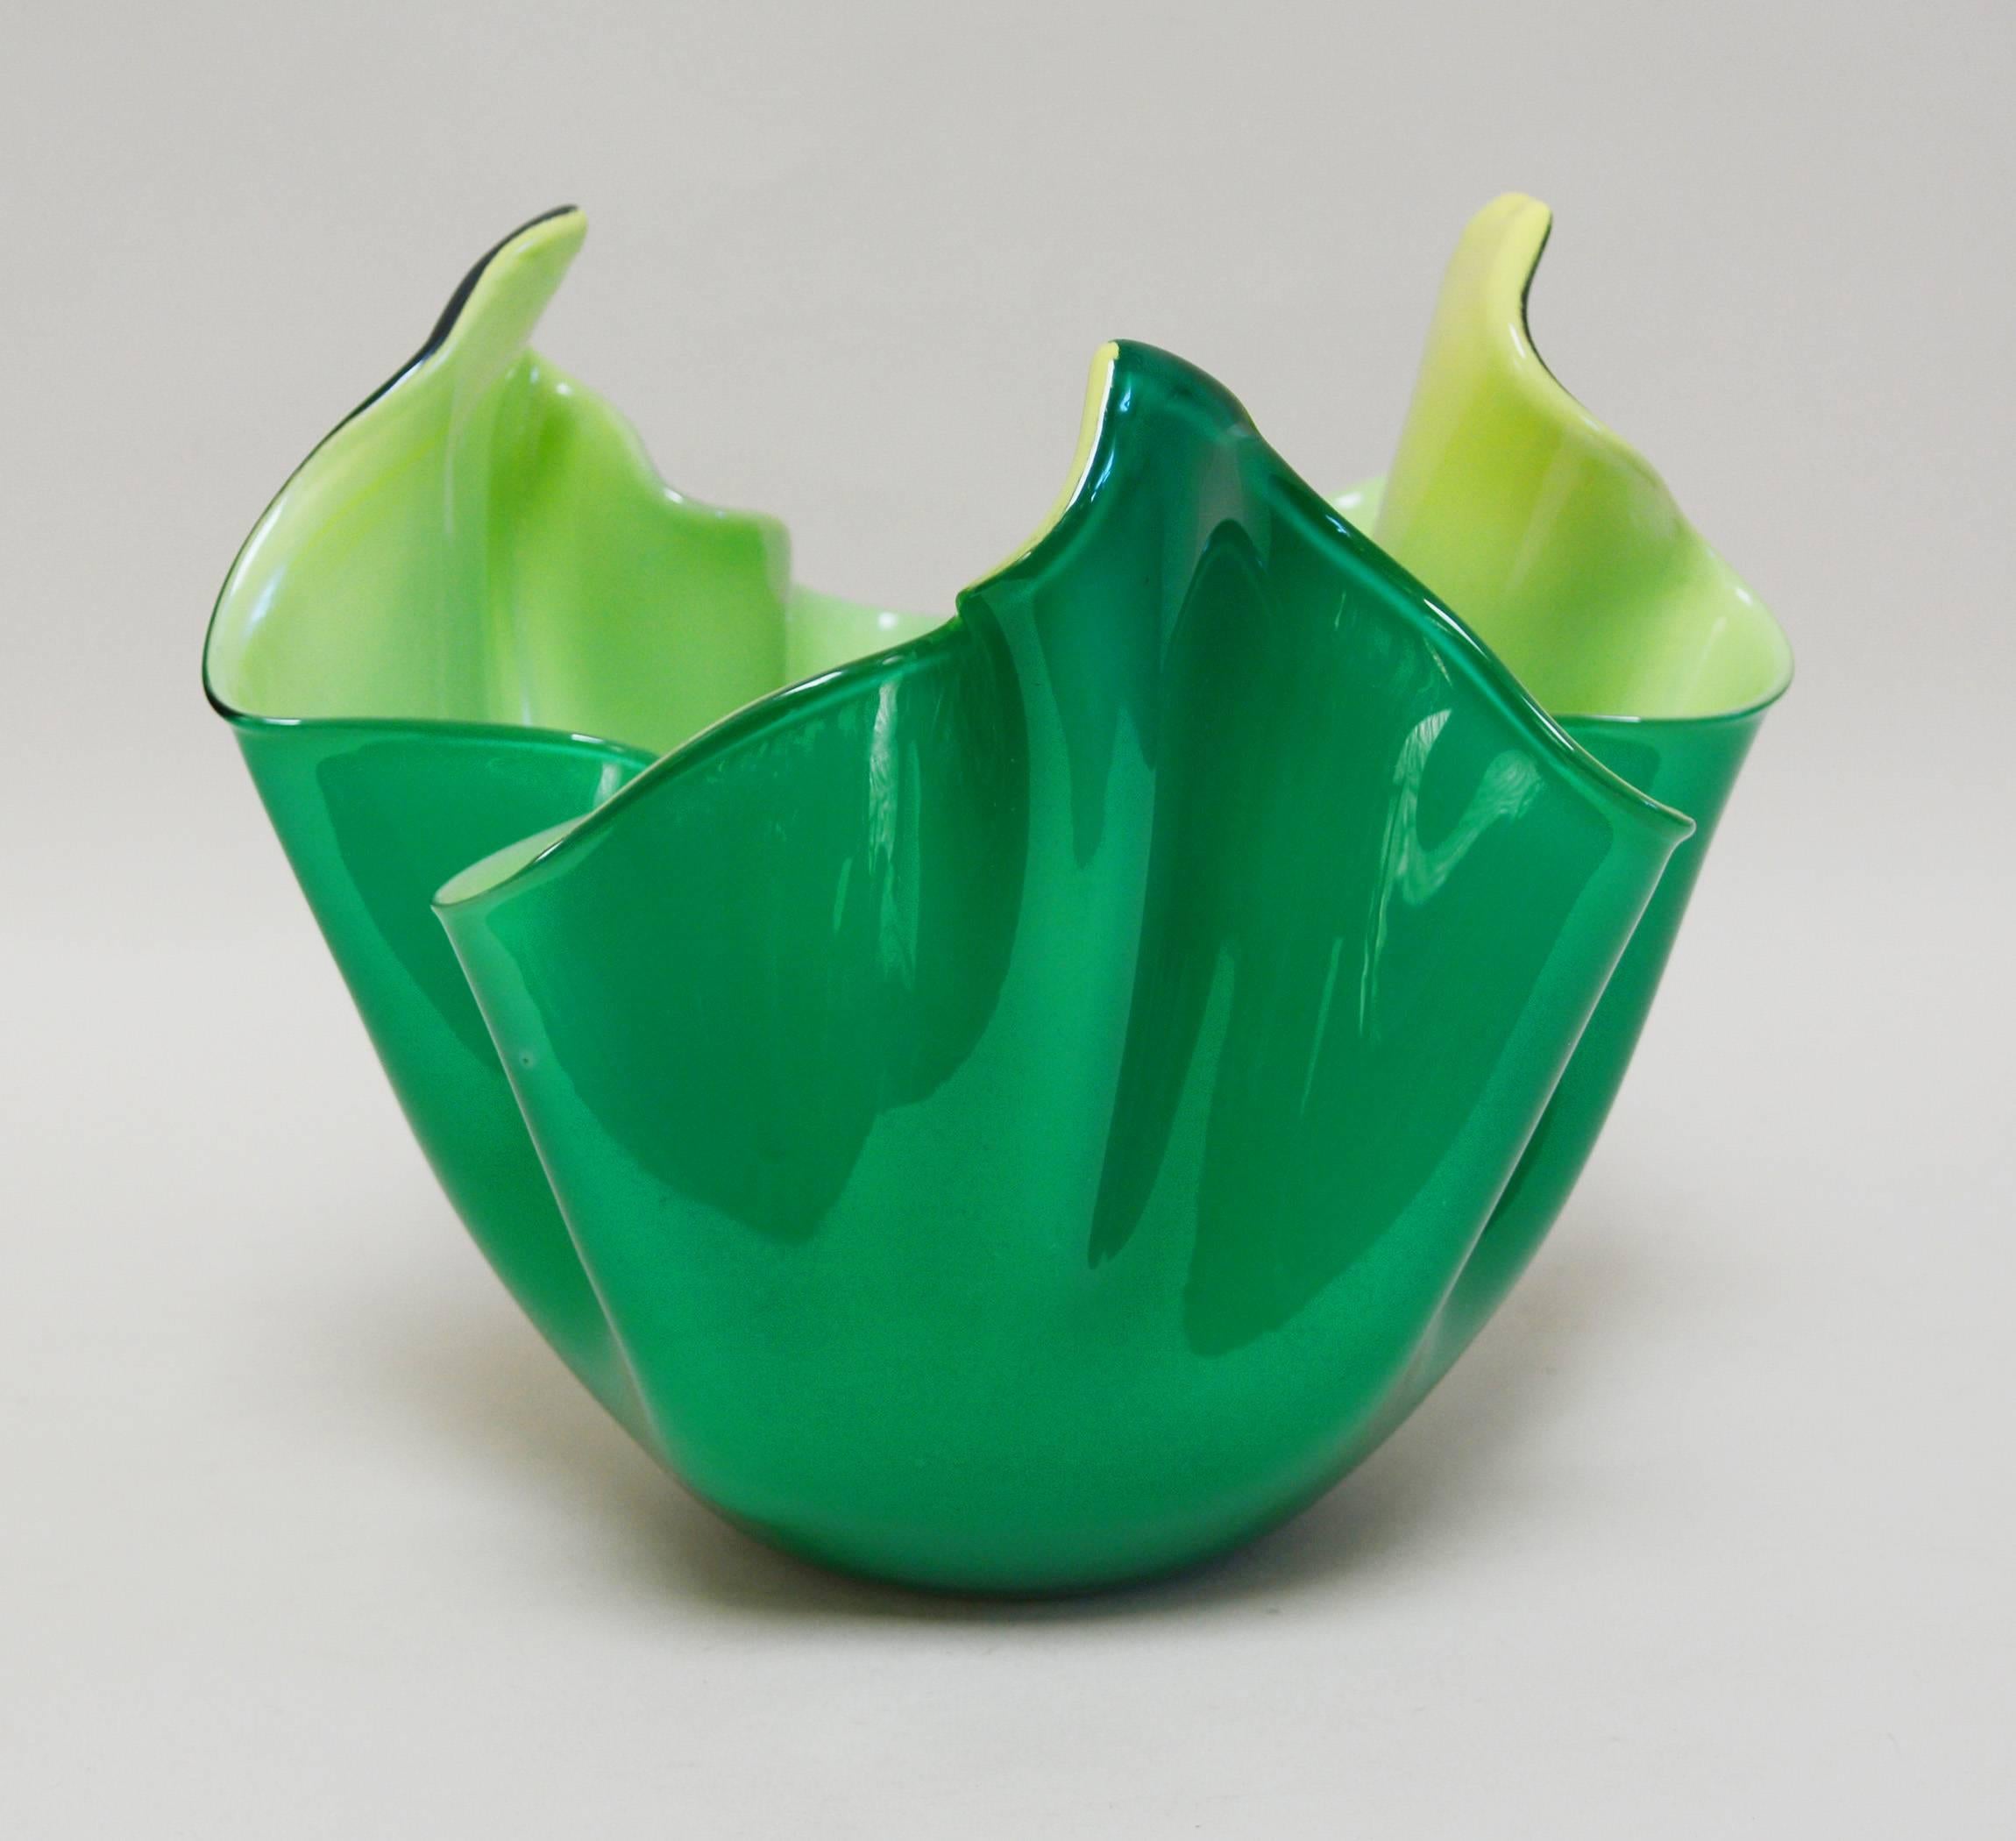 Venini fazzoletto vase with a green exterior and a slightly iridescent pale yellow interior. This form was created by Paolo Venini along with Fulvio Bianconi. This example has the Venini three-line acid stamp.